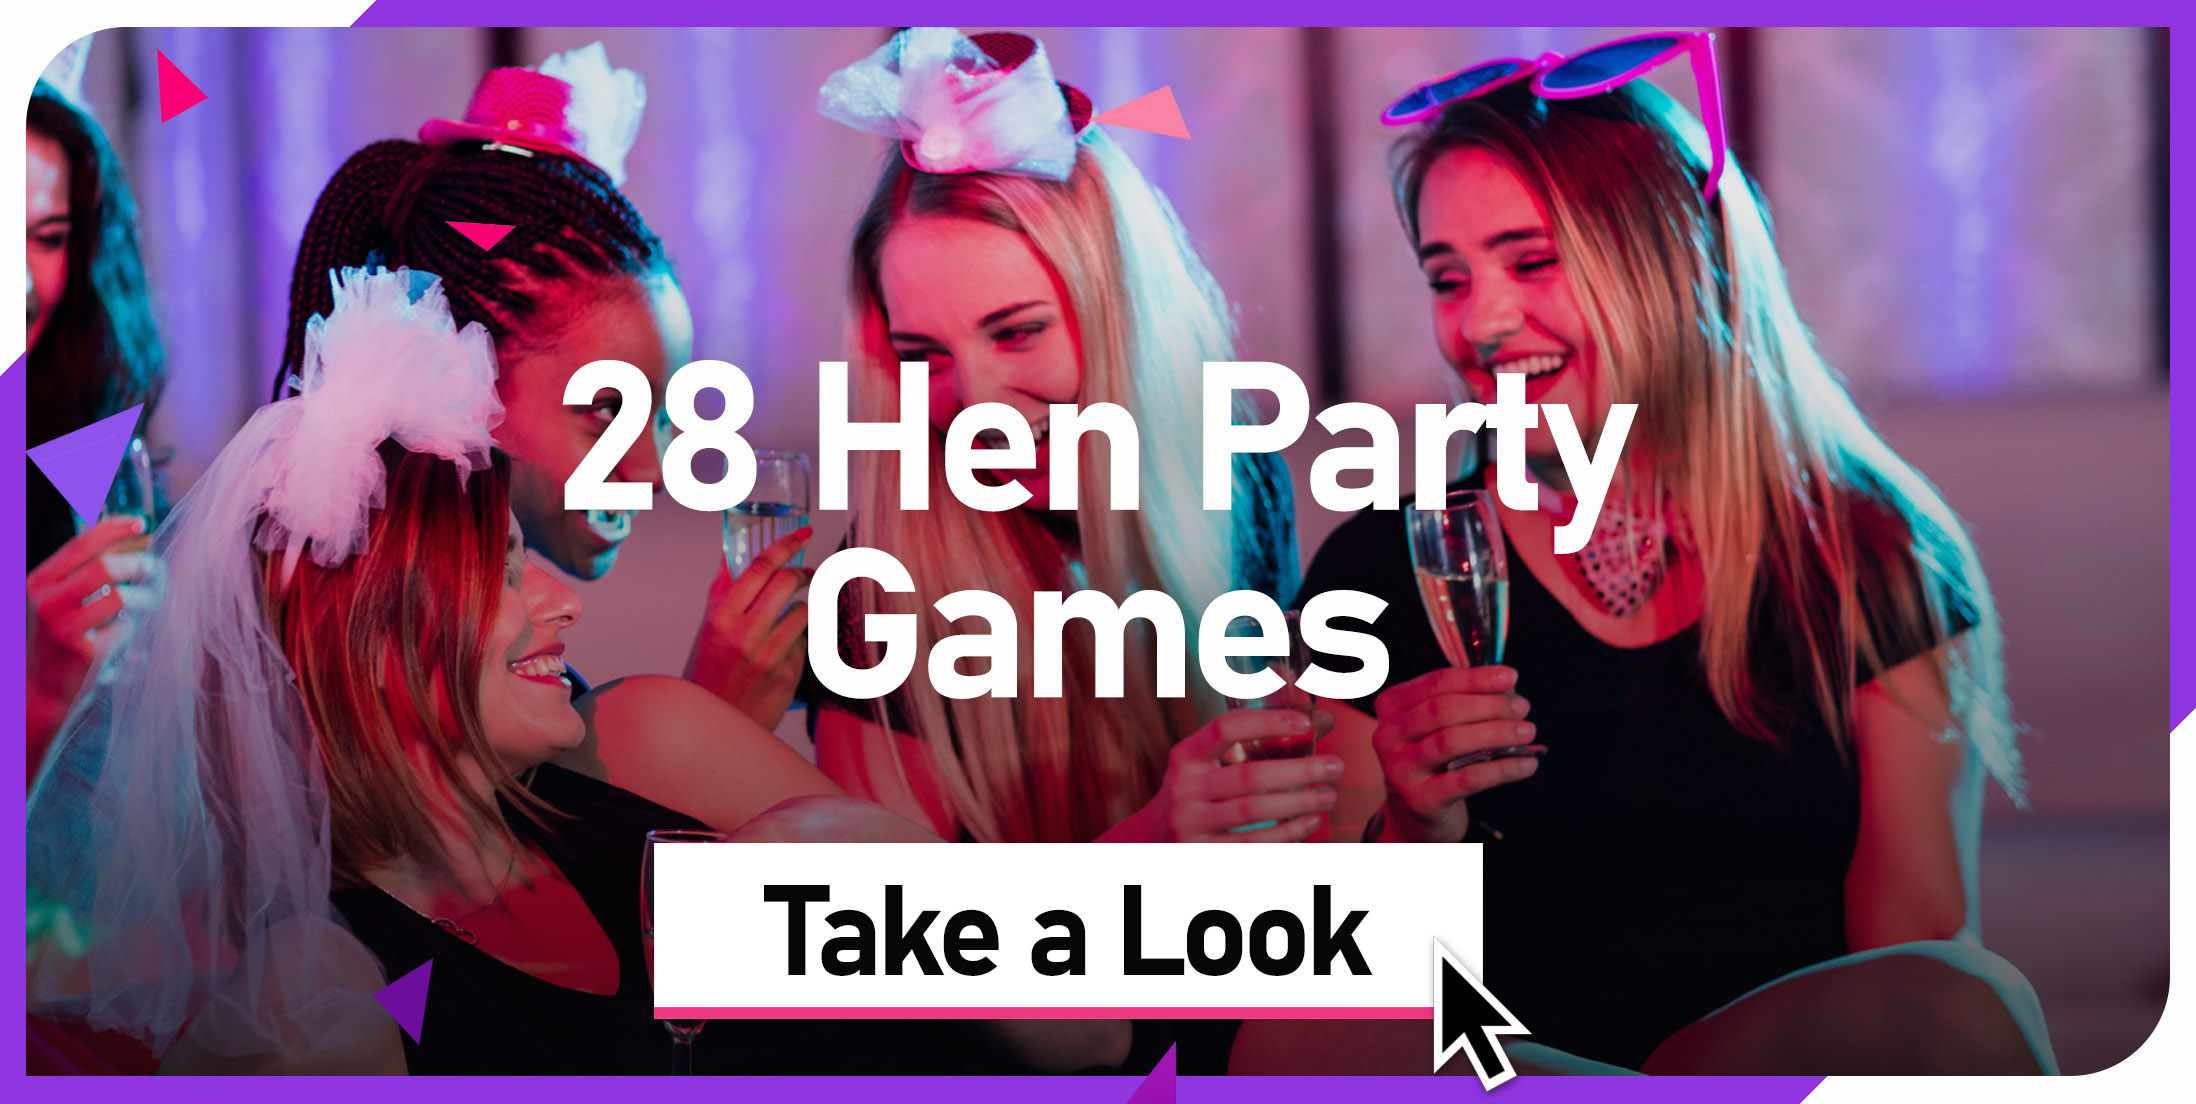 28 Hen Party Games